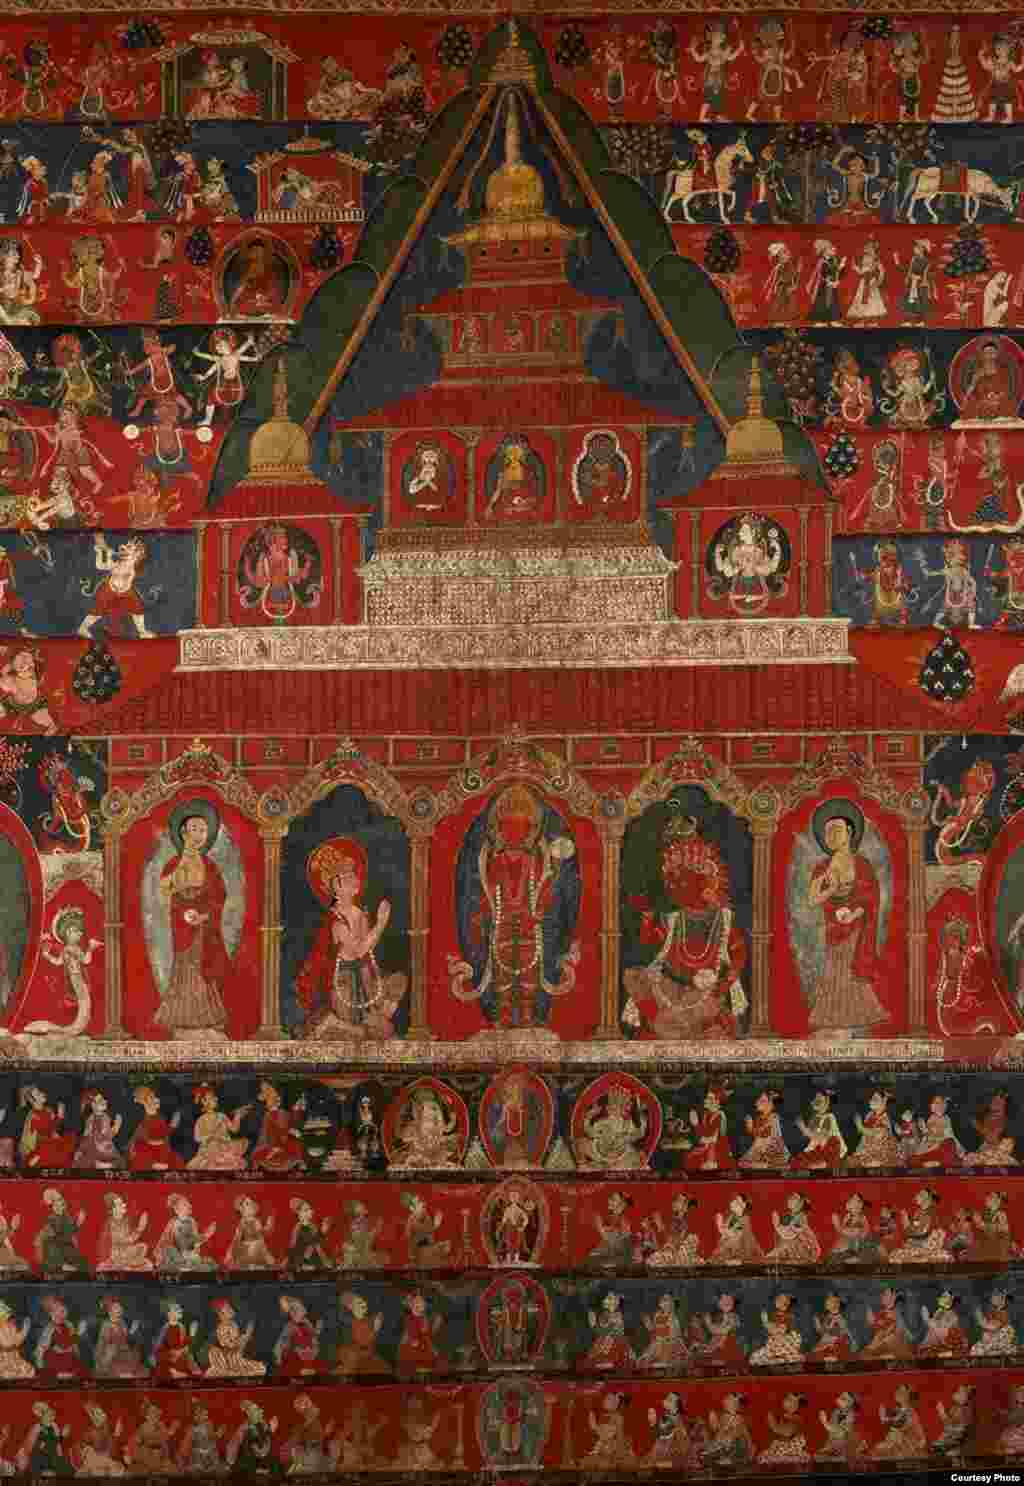 This monumental work, one of the largest Nepalese scroll paintings (paubha) in the world, depicts the temple of Rato Macchendranath in the ancient kingdom of Patan in the Kathmandu Valley. (Rubin Museum of Art)